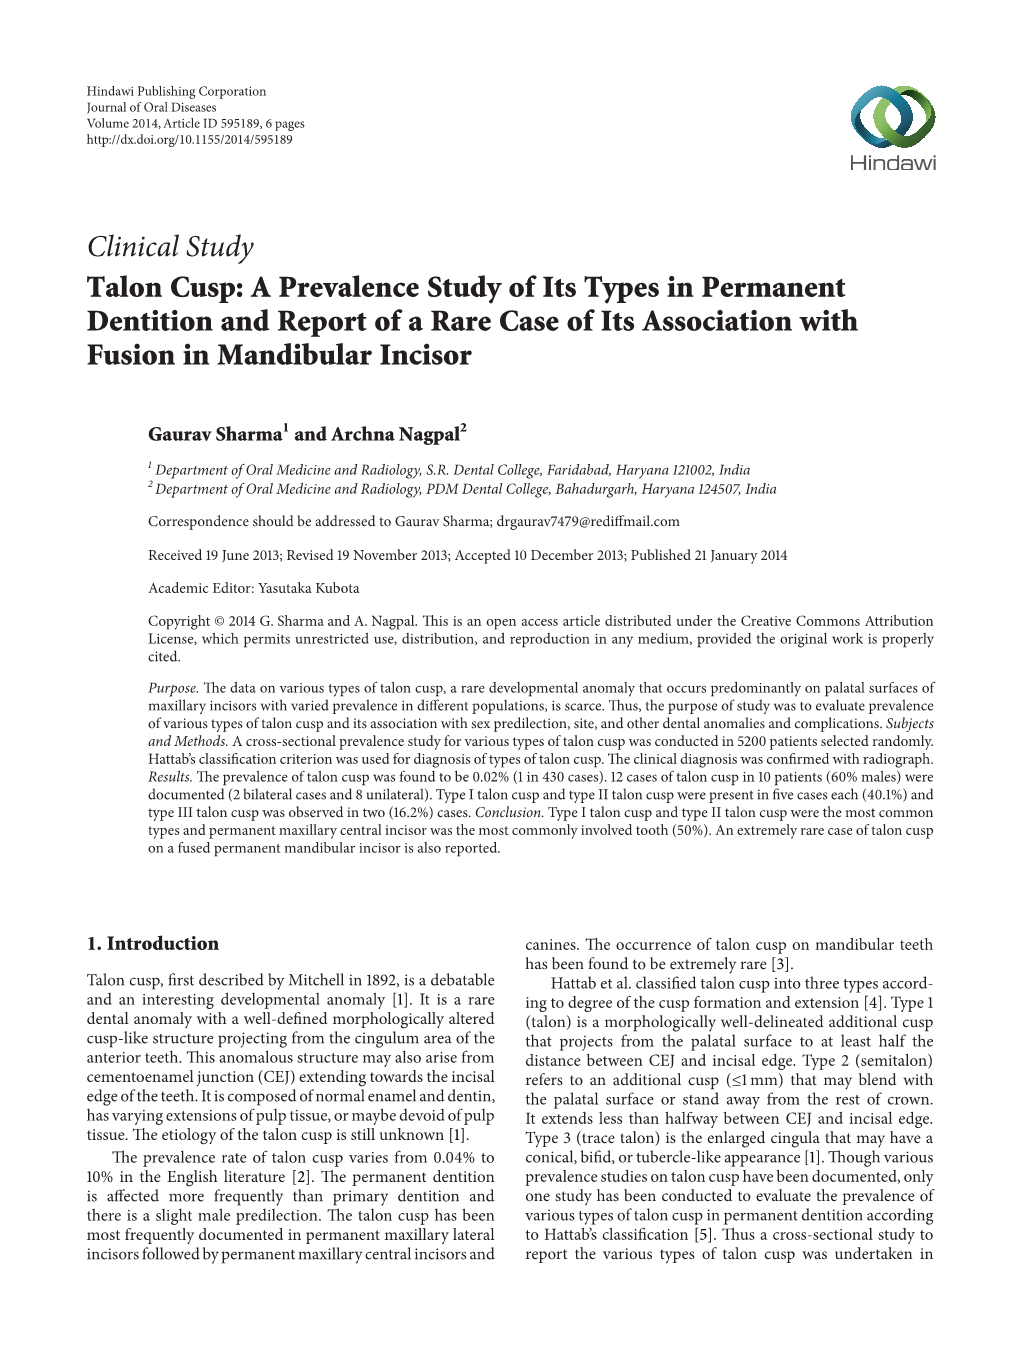 A Prevalence Study of Its Types in Permanent Dentition and Report of a Rare Case of Its Association with Fusion in Mandibular Incisor